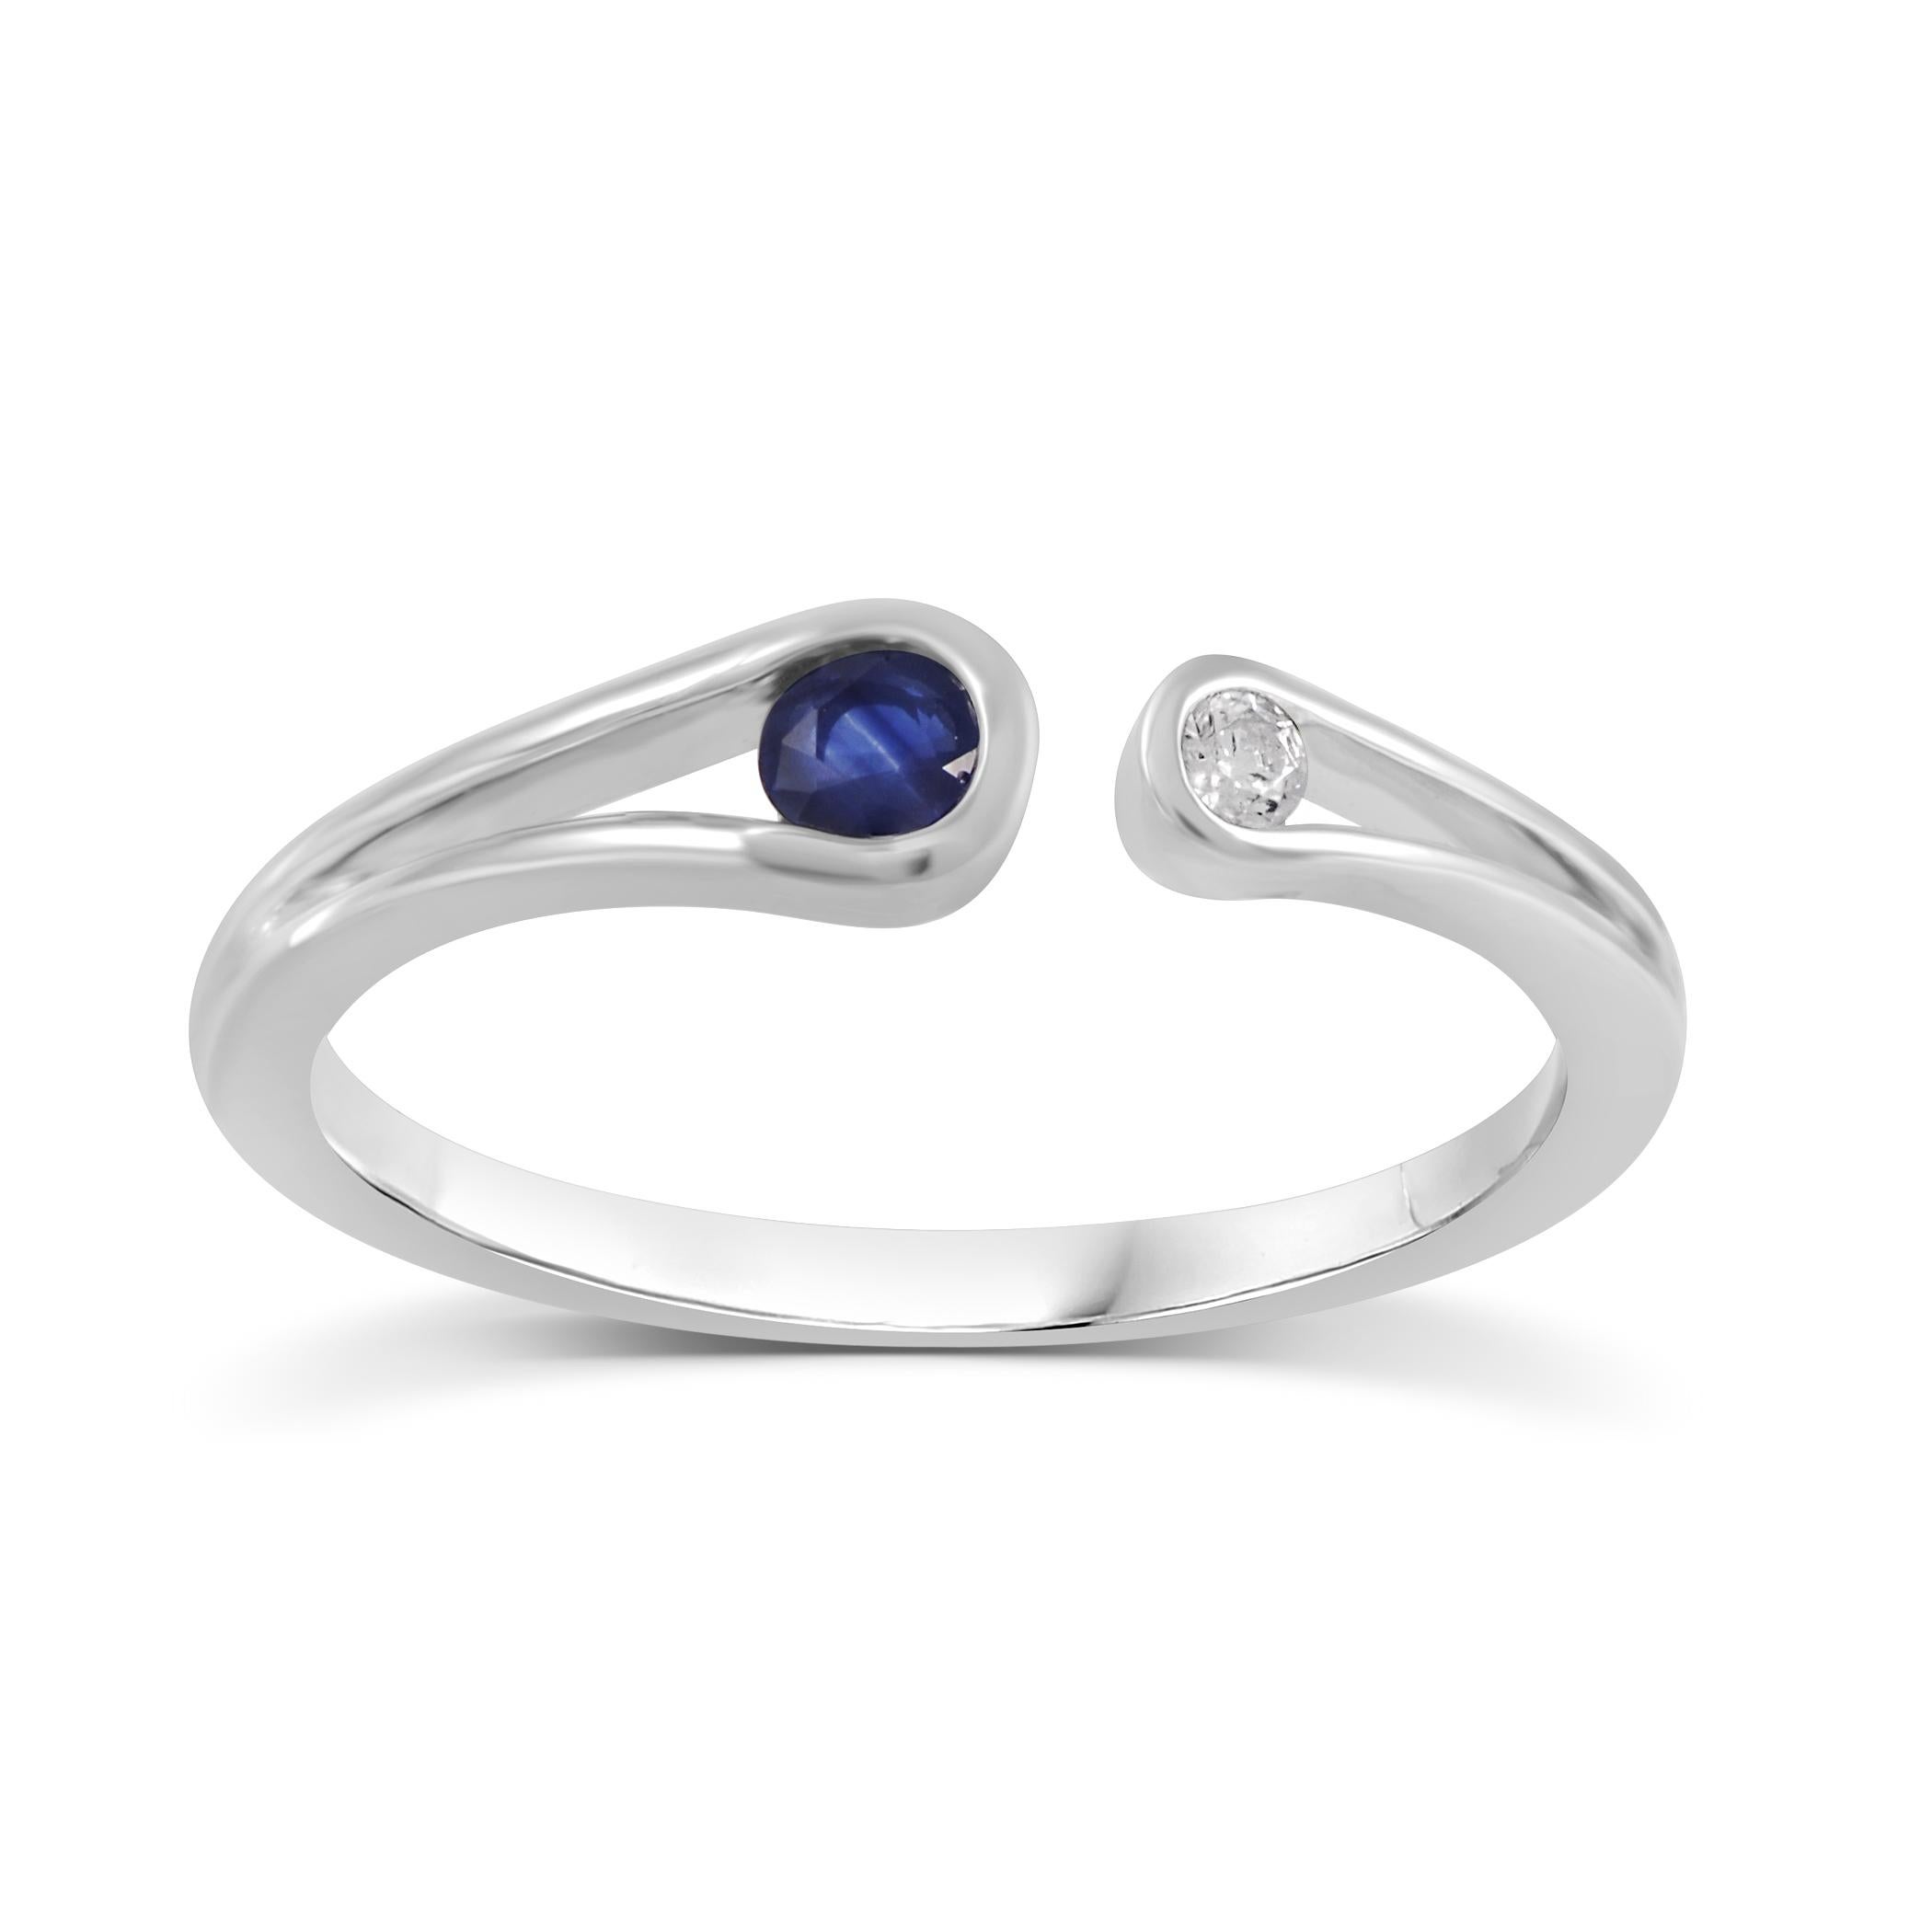 Great as a fashion ring, wear it alone or with a hand full of rings. Features a round blue sapphire and a round diamond.

Available in US Size 6 and 7.

14K Yellow Gold Diamond and Blue Sapphire Ring
- Diamond Quality: H/SI
- Diamond Weight: 0.04 ct